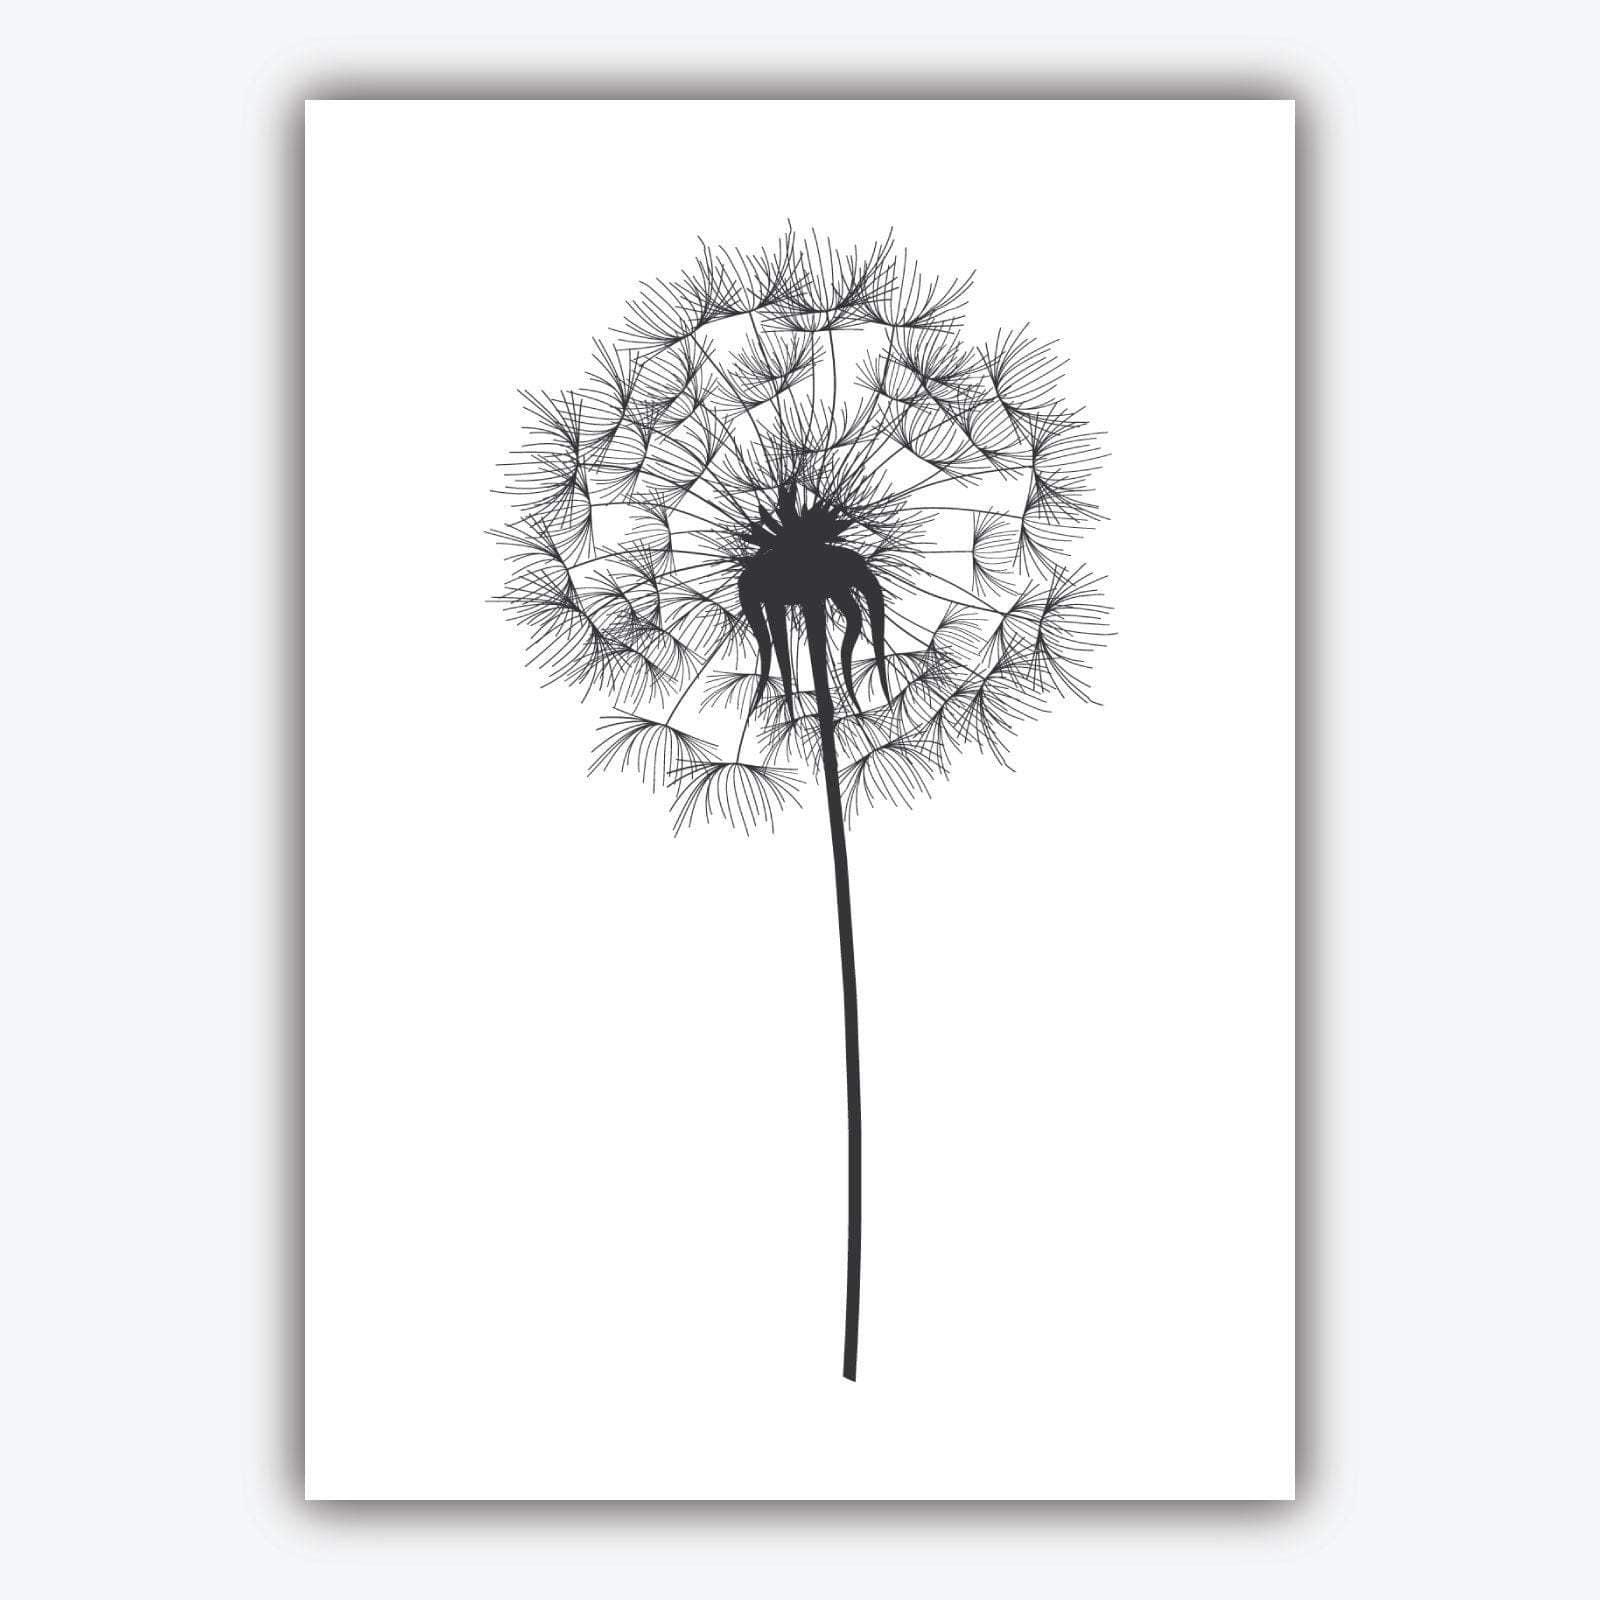 Set of 5 ORIGINAL Gallery wall ART Prints Graphical Sketch DANDELION triptych with Pair of Magnolia Art Photographs Botanical Floral